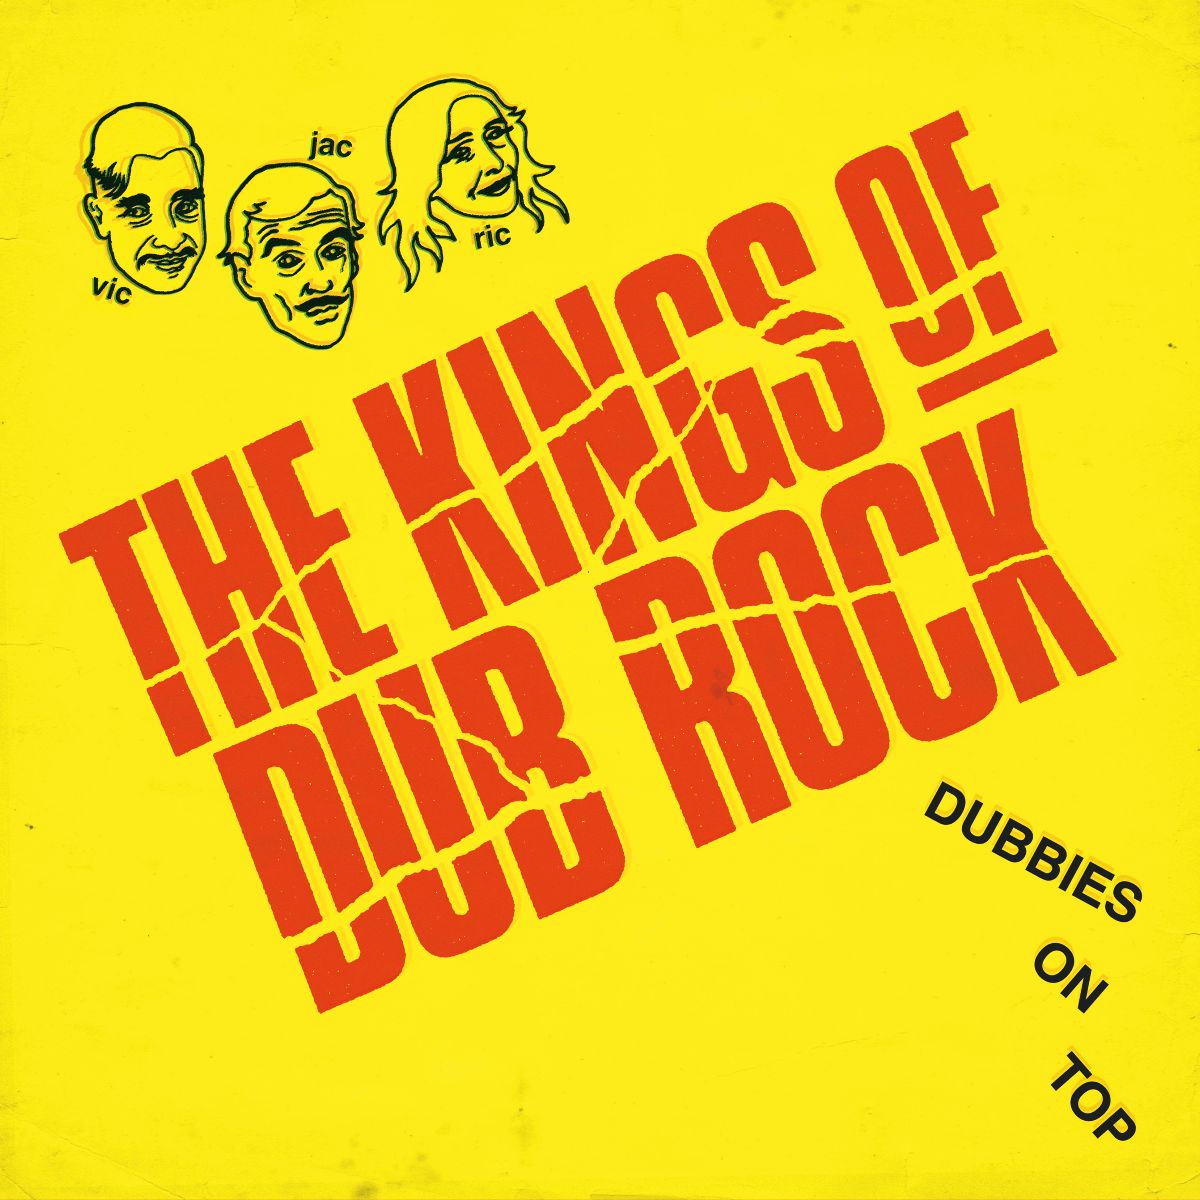 THE KINGS OF DUBROCK – DUBBIES ON TOP